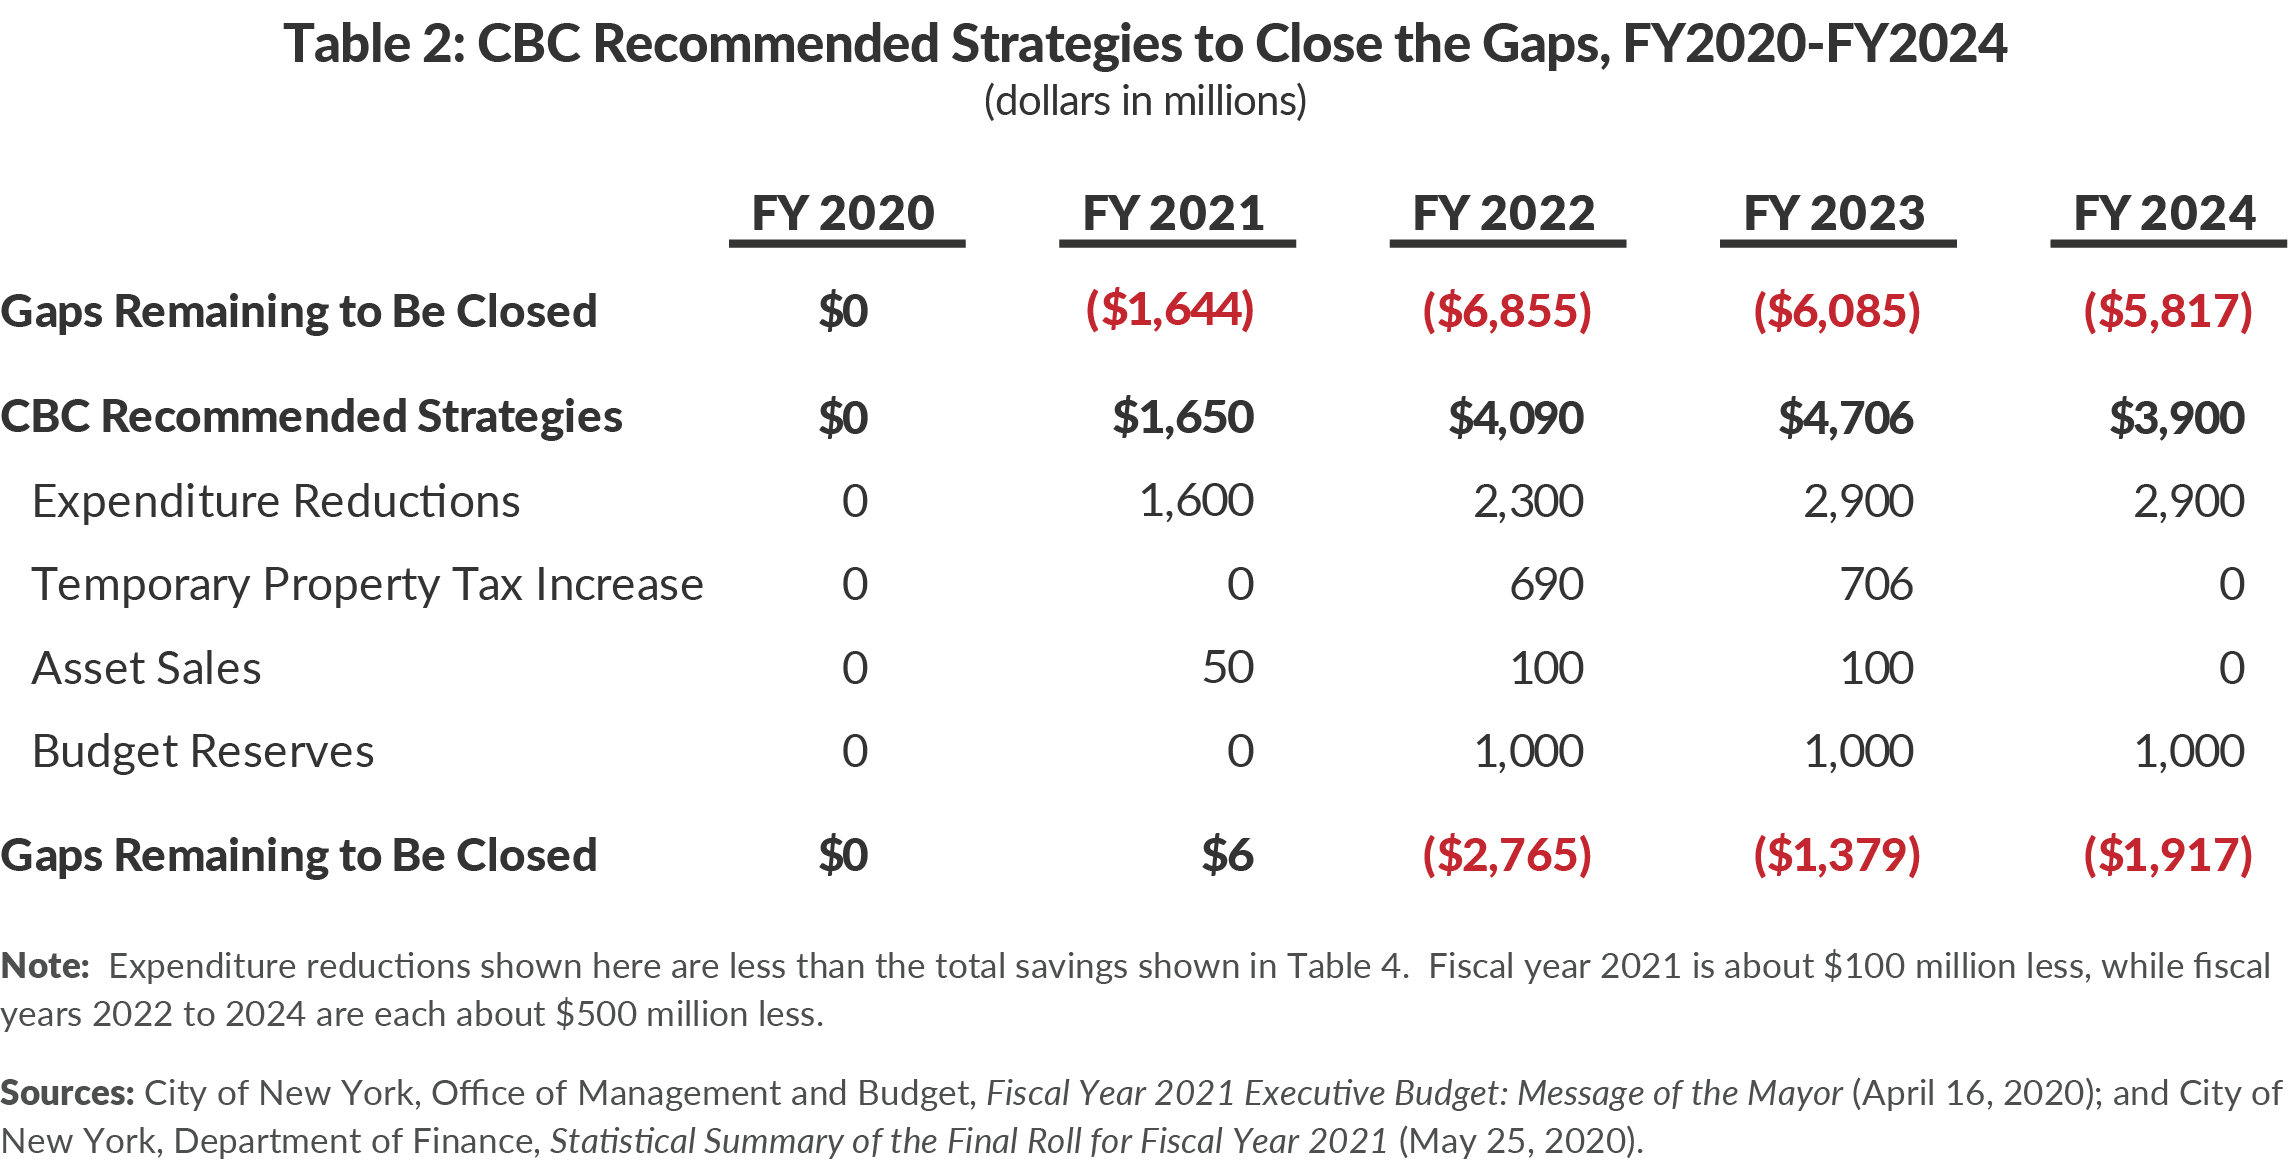 Table 2: CBC Recommended Strategies to Close the Gaps, FY2020-FY2024